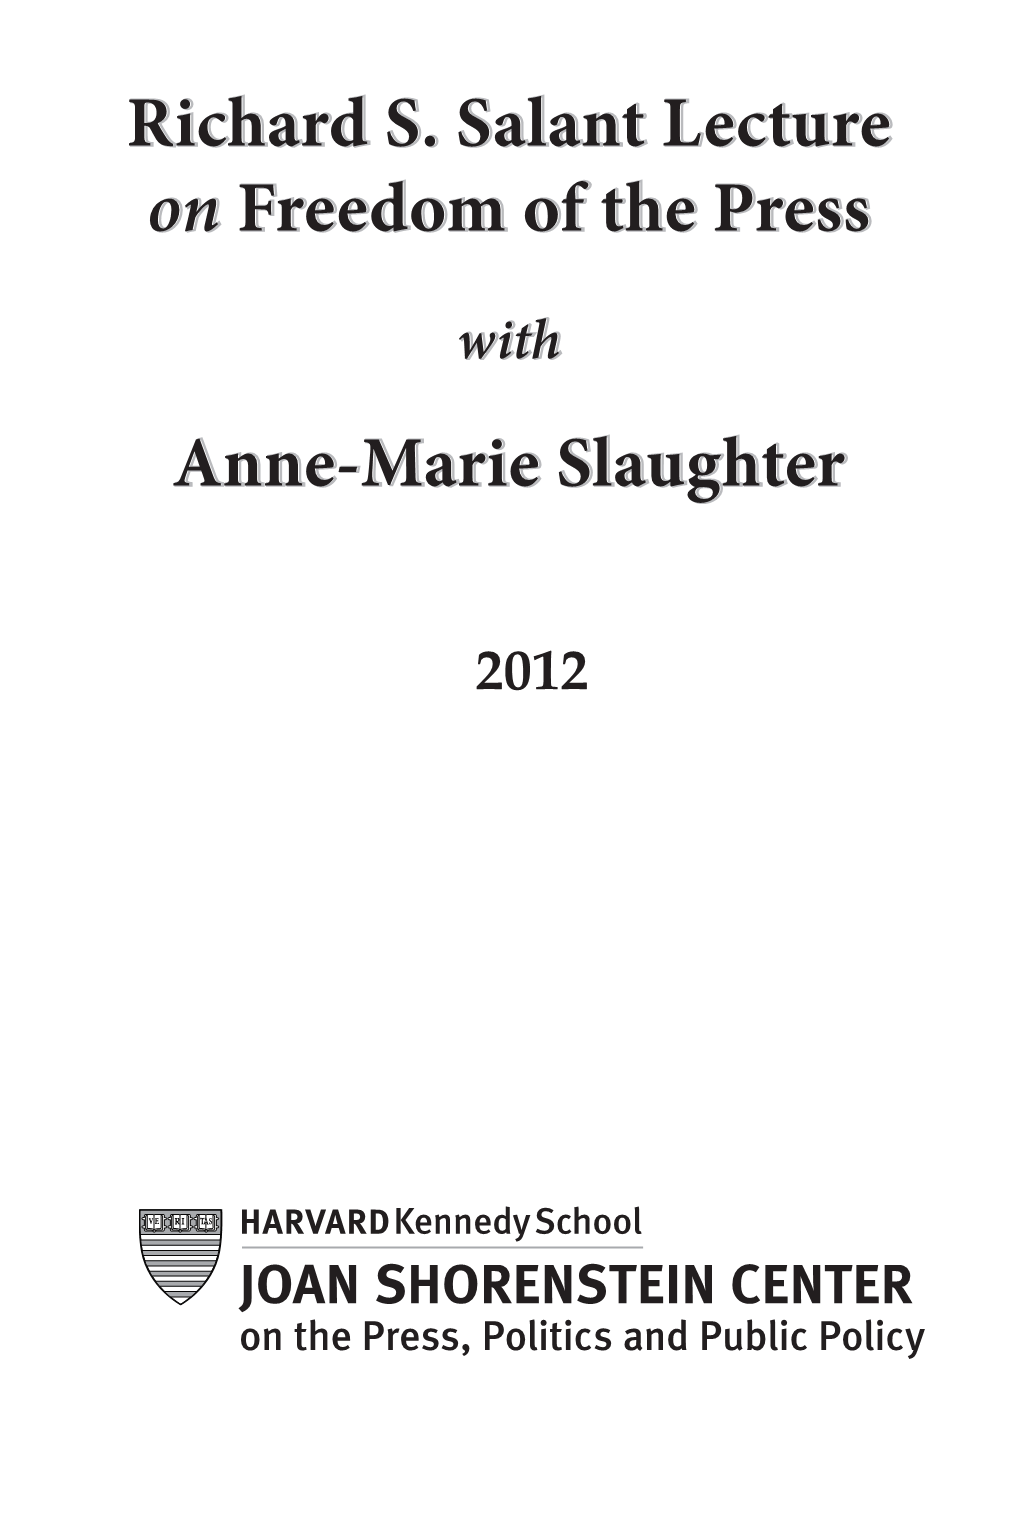 Anne-Marie Slaughter